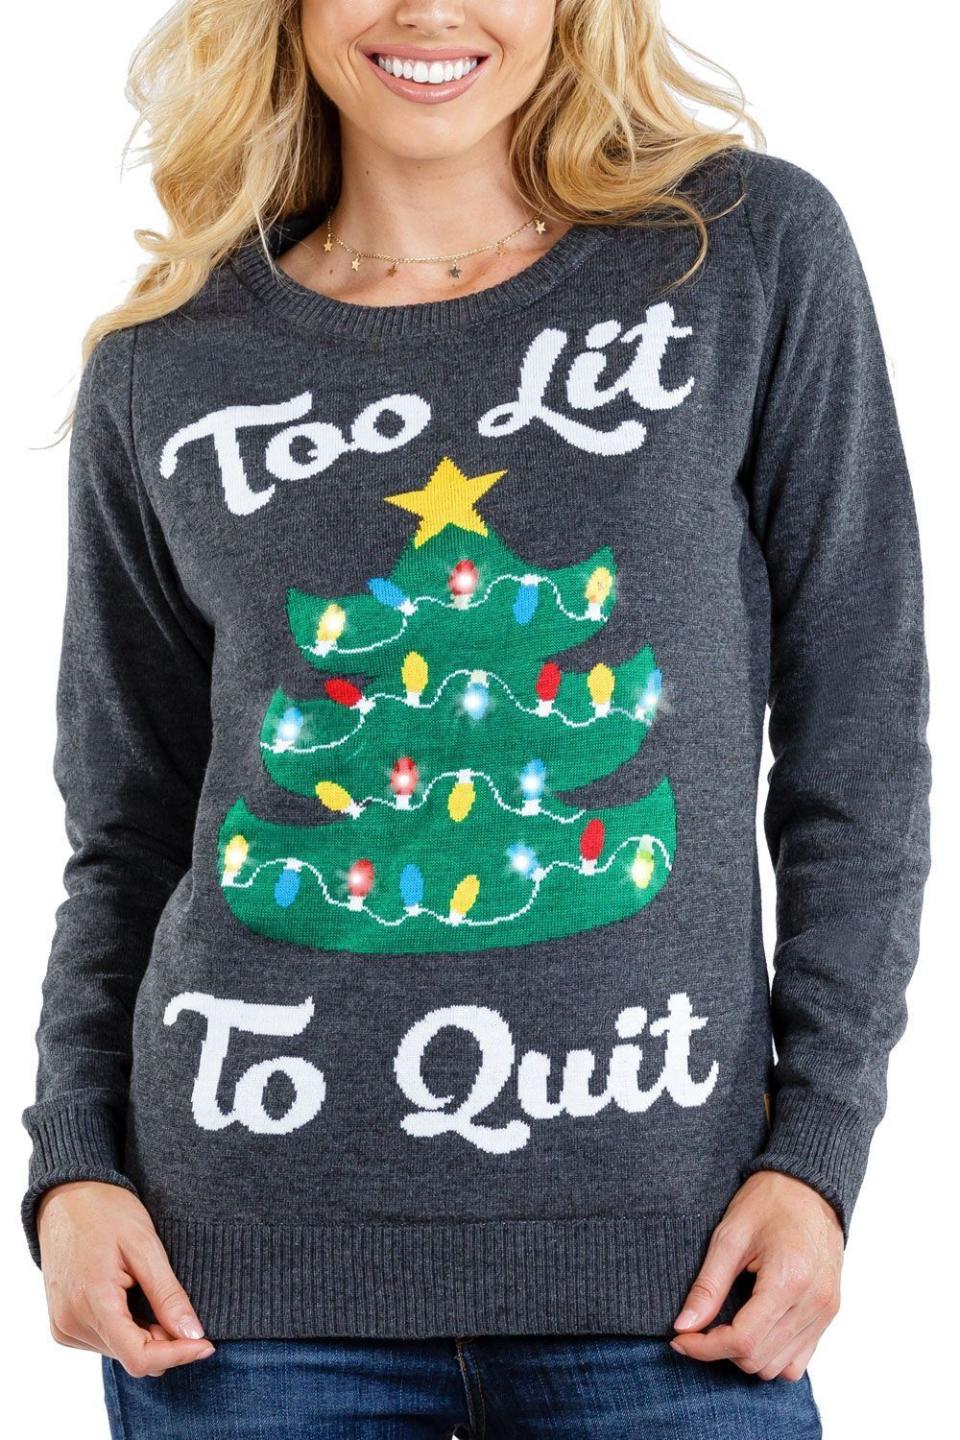 13) Tipsy Elves Too Lit to Quit Ugly Christmas Sweater